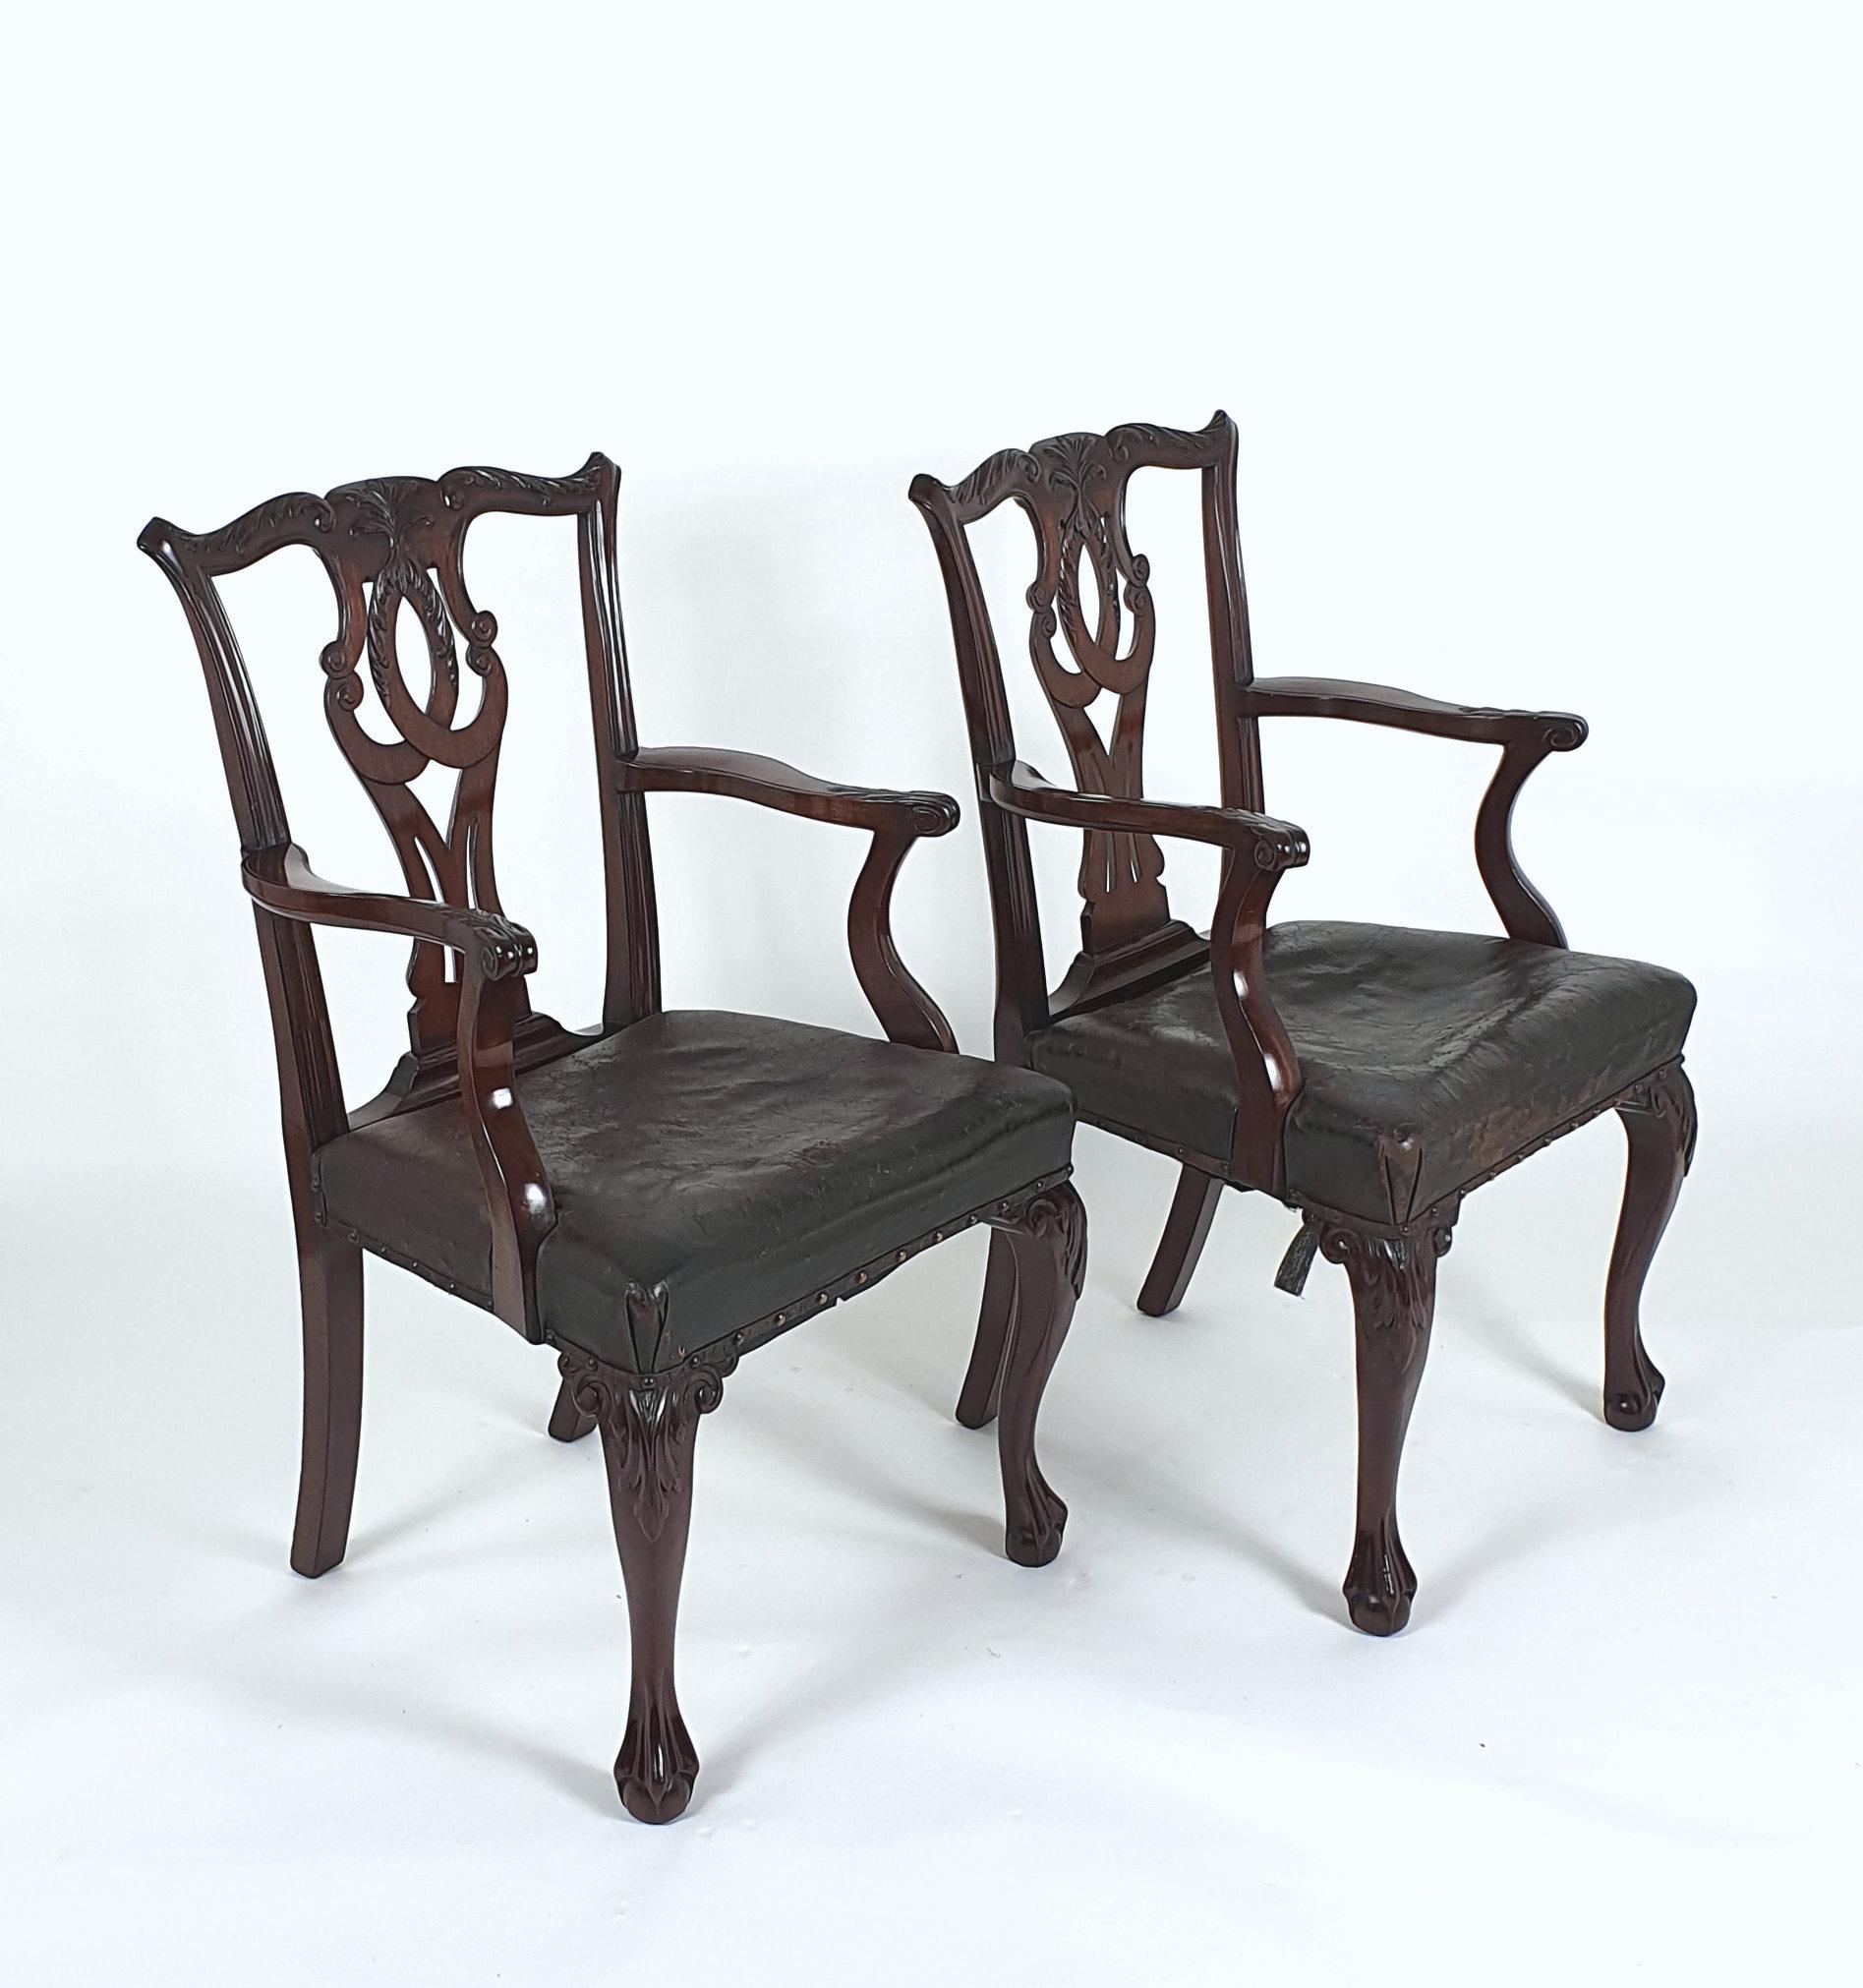 This pair of extremely handsome and splendid 19th century Chippendale designed elbow chairs are of a Chippendale design with cabriole leg supports and ball and claw feet. The seats have a distressed dark brown leather hide, that are well worn but